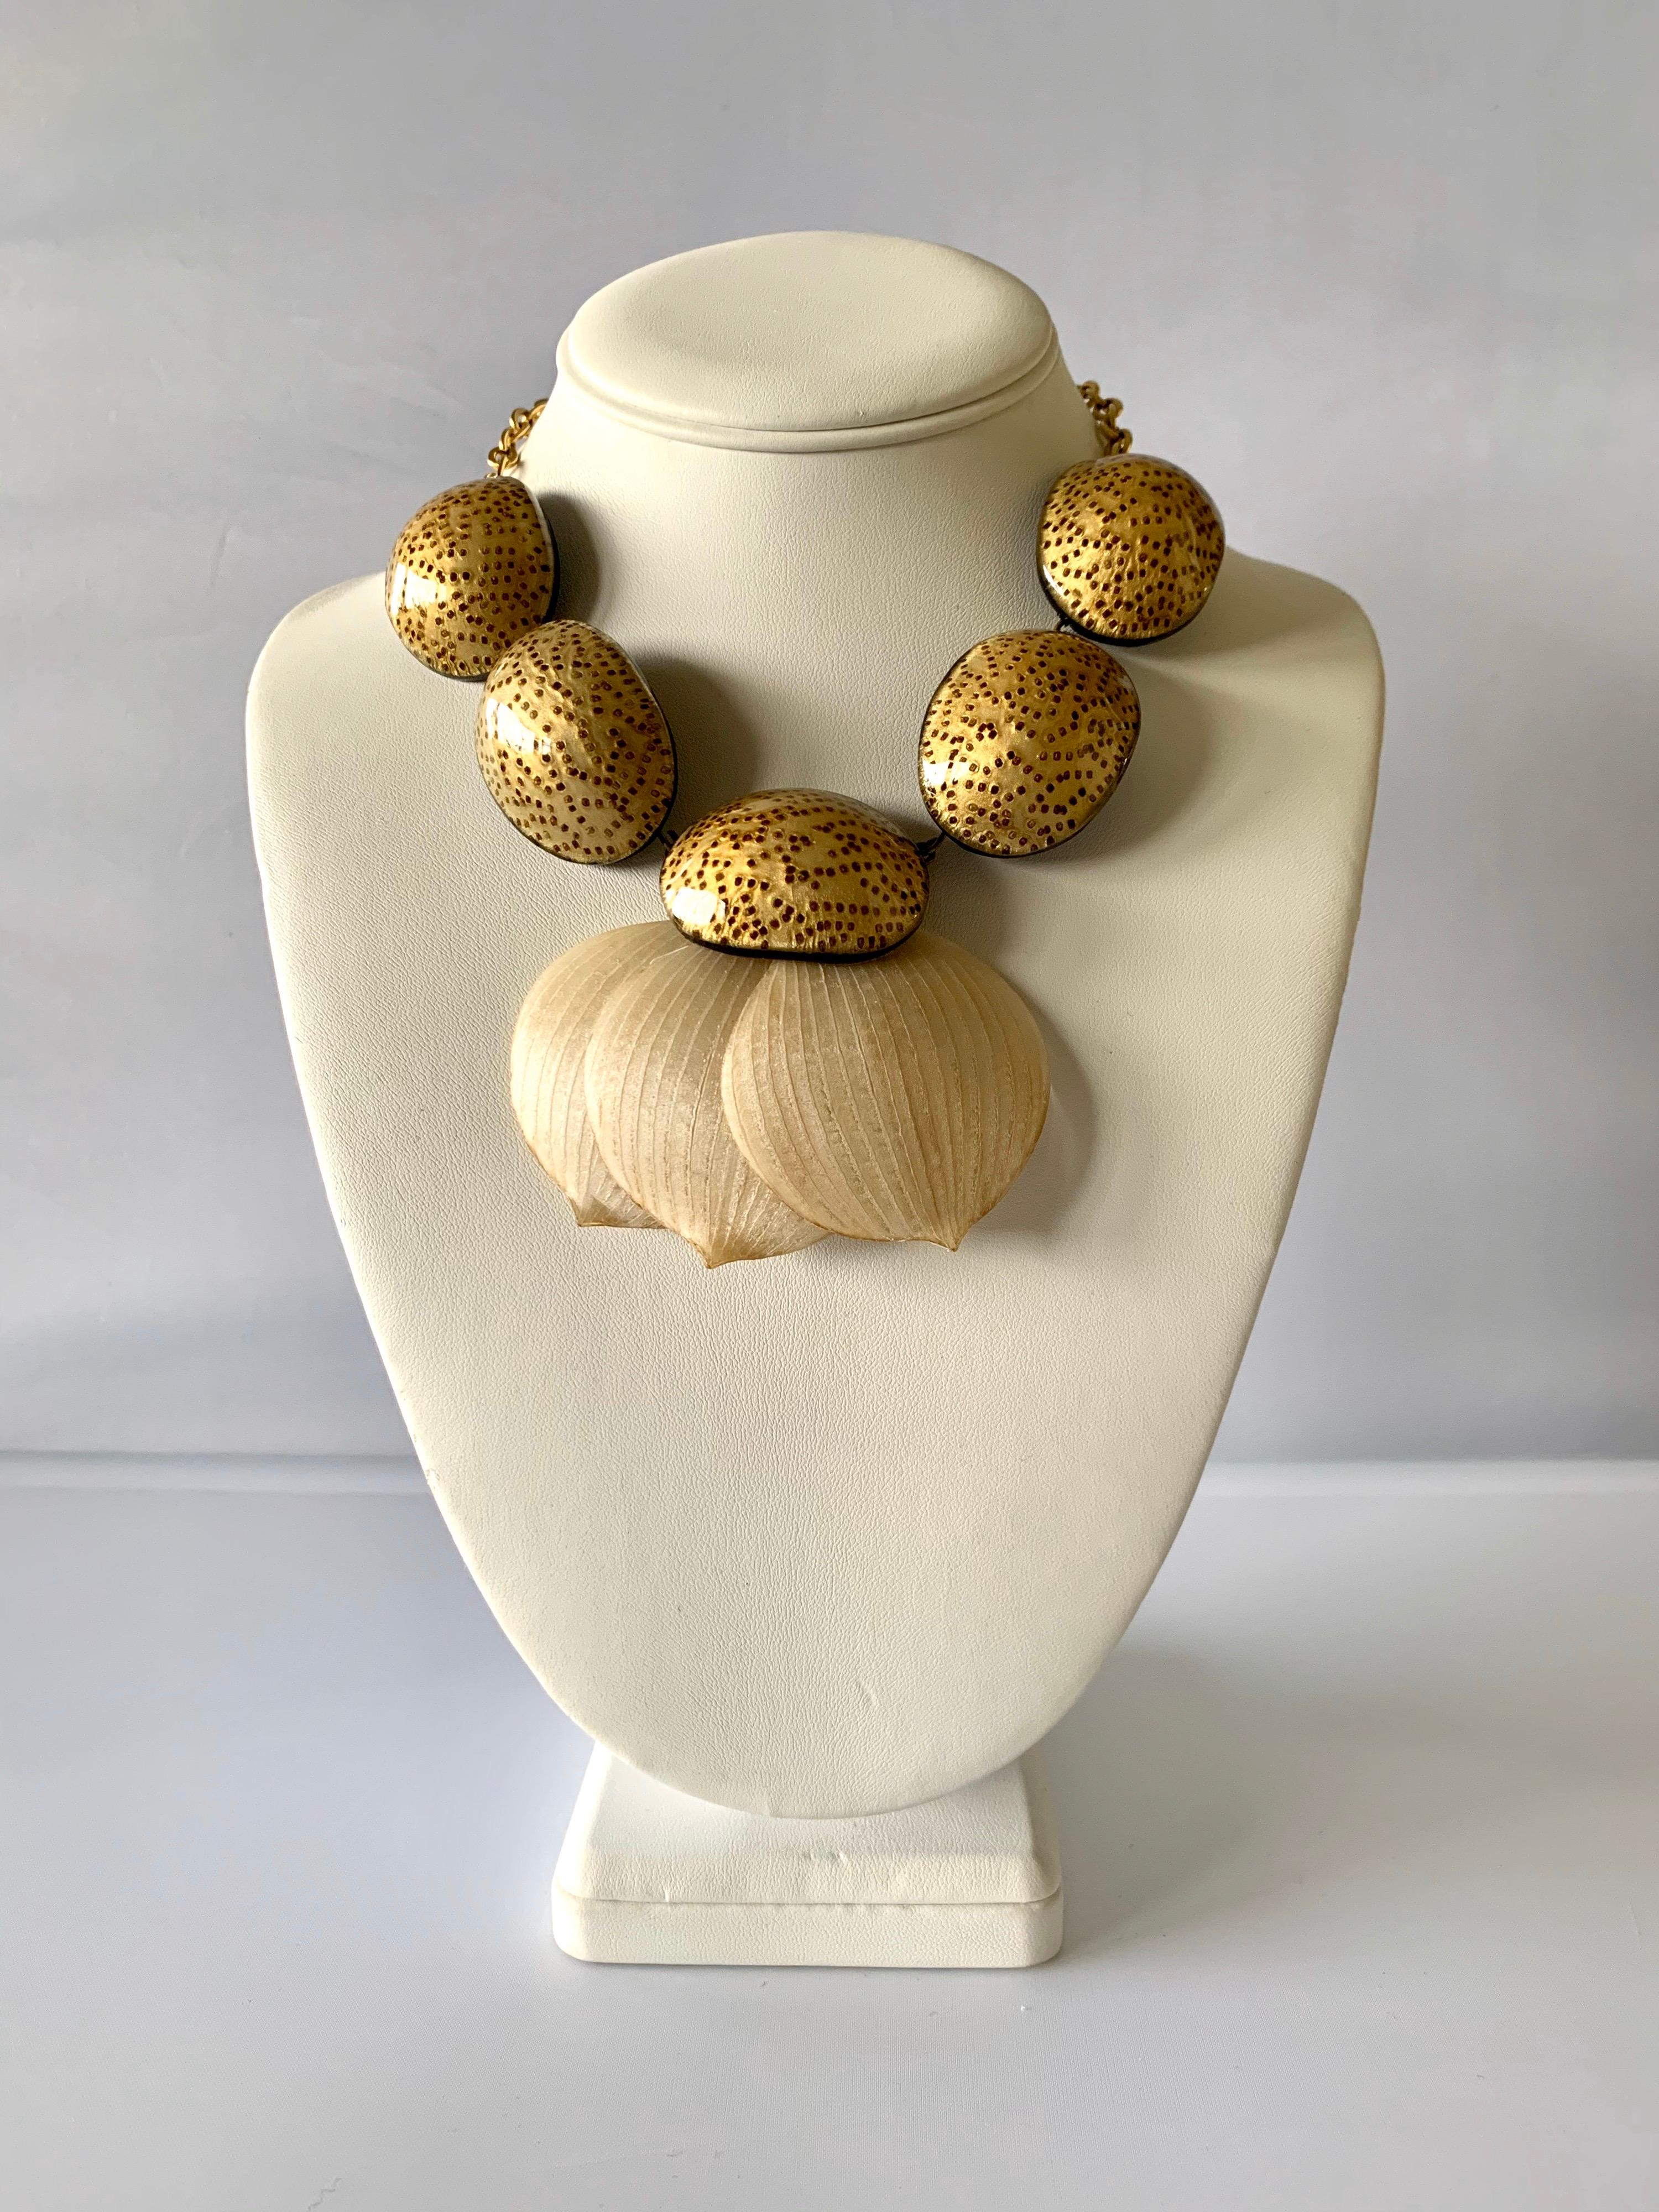 French artisan gold leaves statement necklace - the contemporary necklace is comprised of a gilt metal chain and features five three dimensional oval segments finished in gold enamel and resin. The oval segments have a detail that gives a